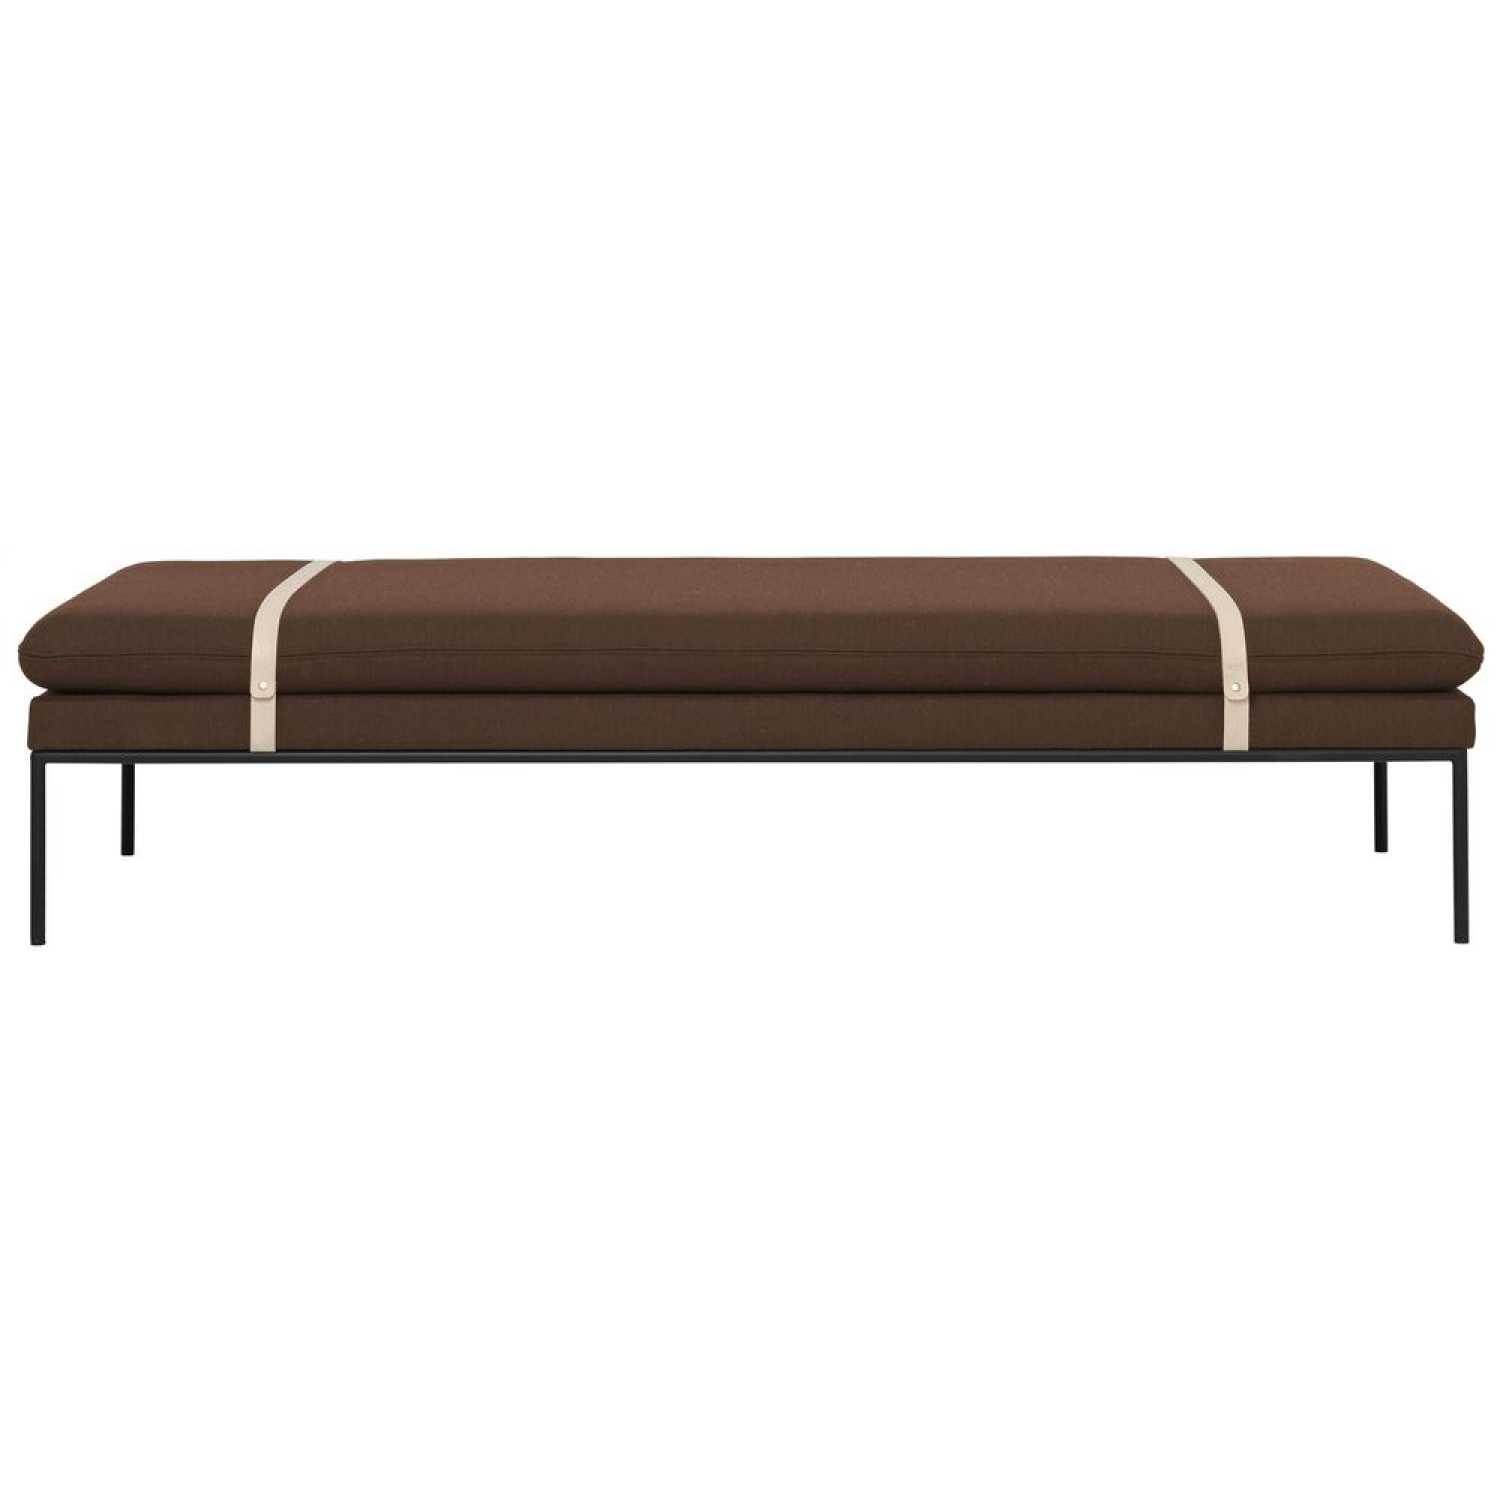 Ferm Living Turn Fiord Daybed - Rust - Natural Strap